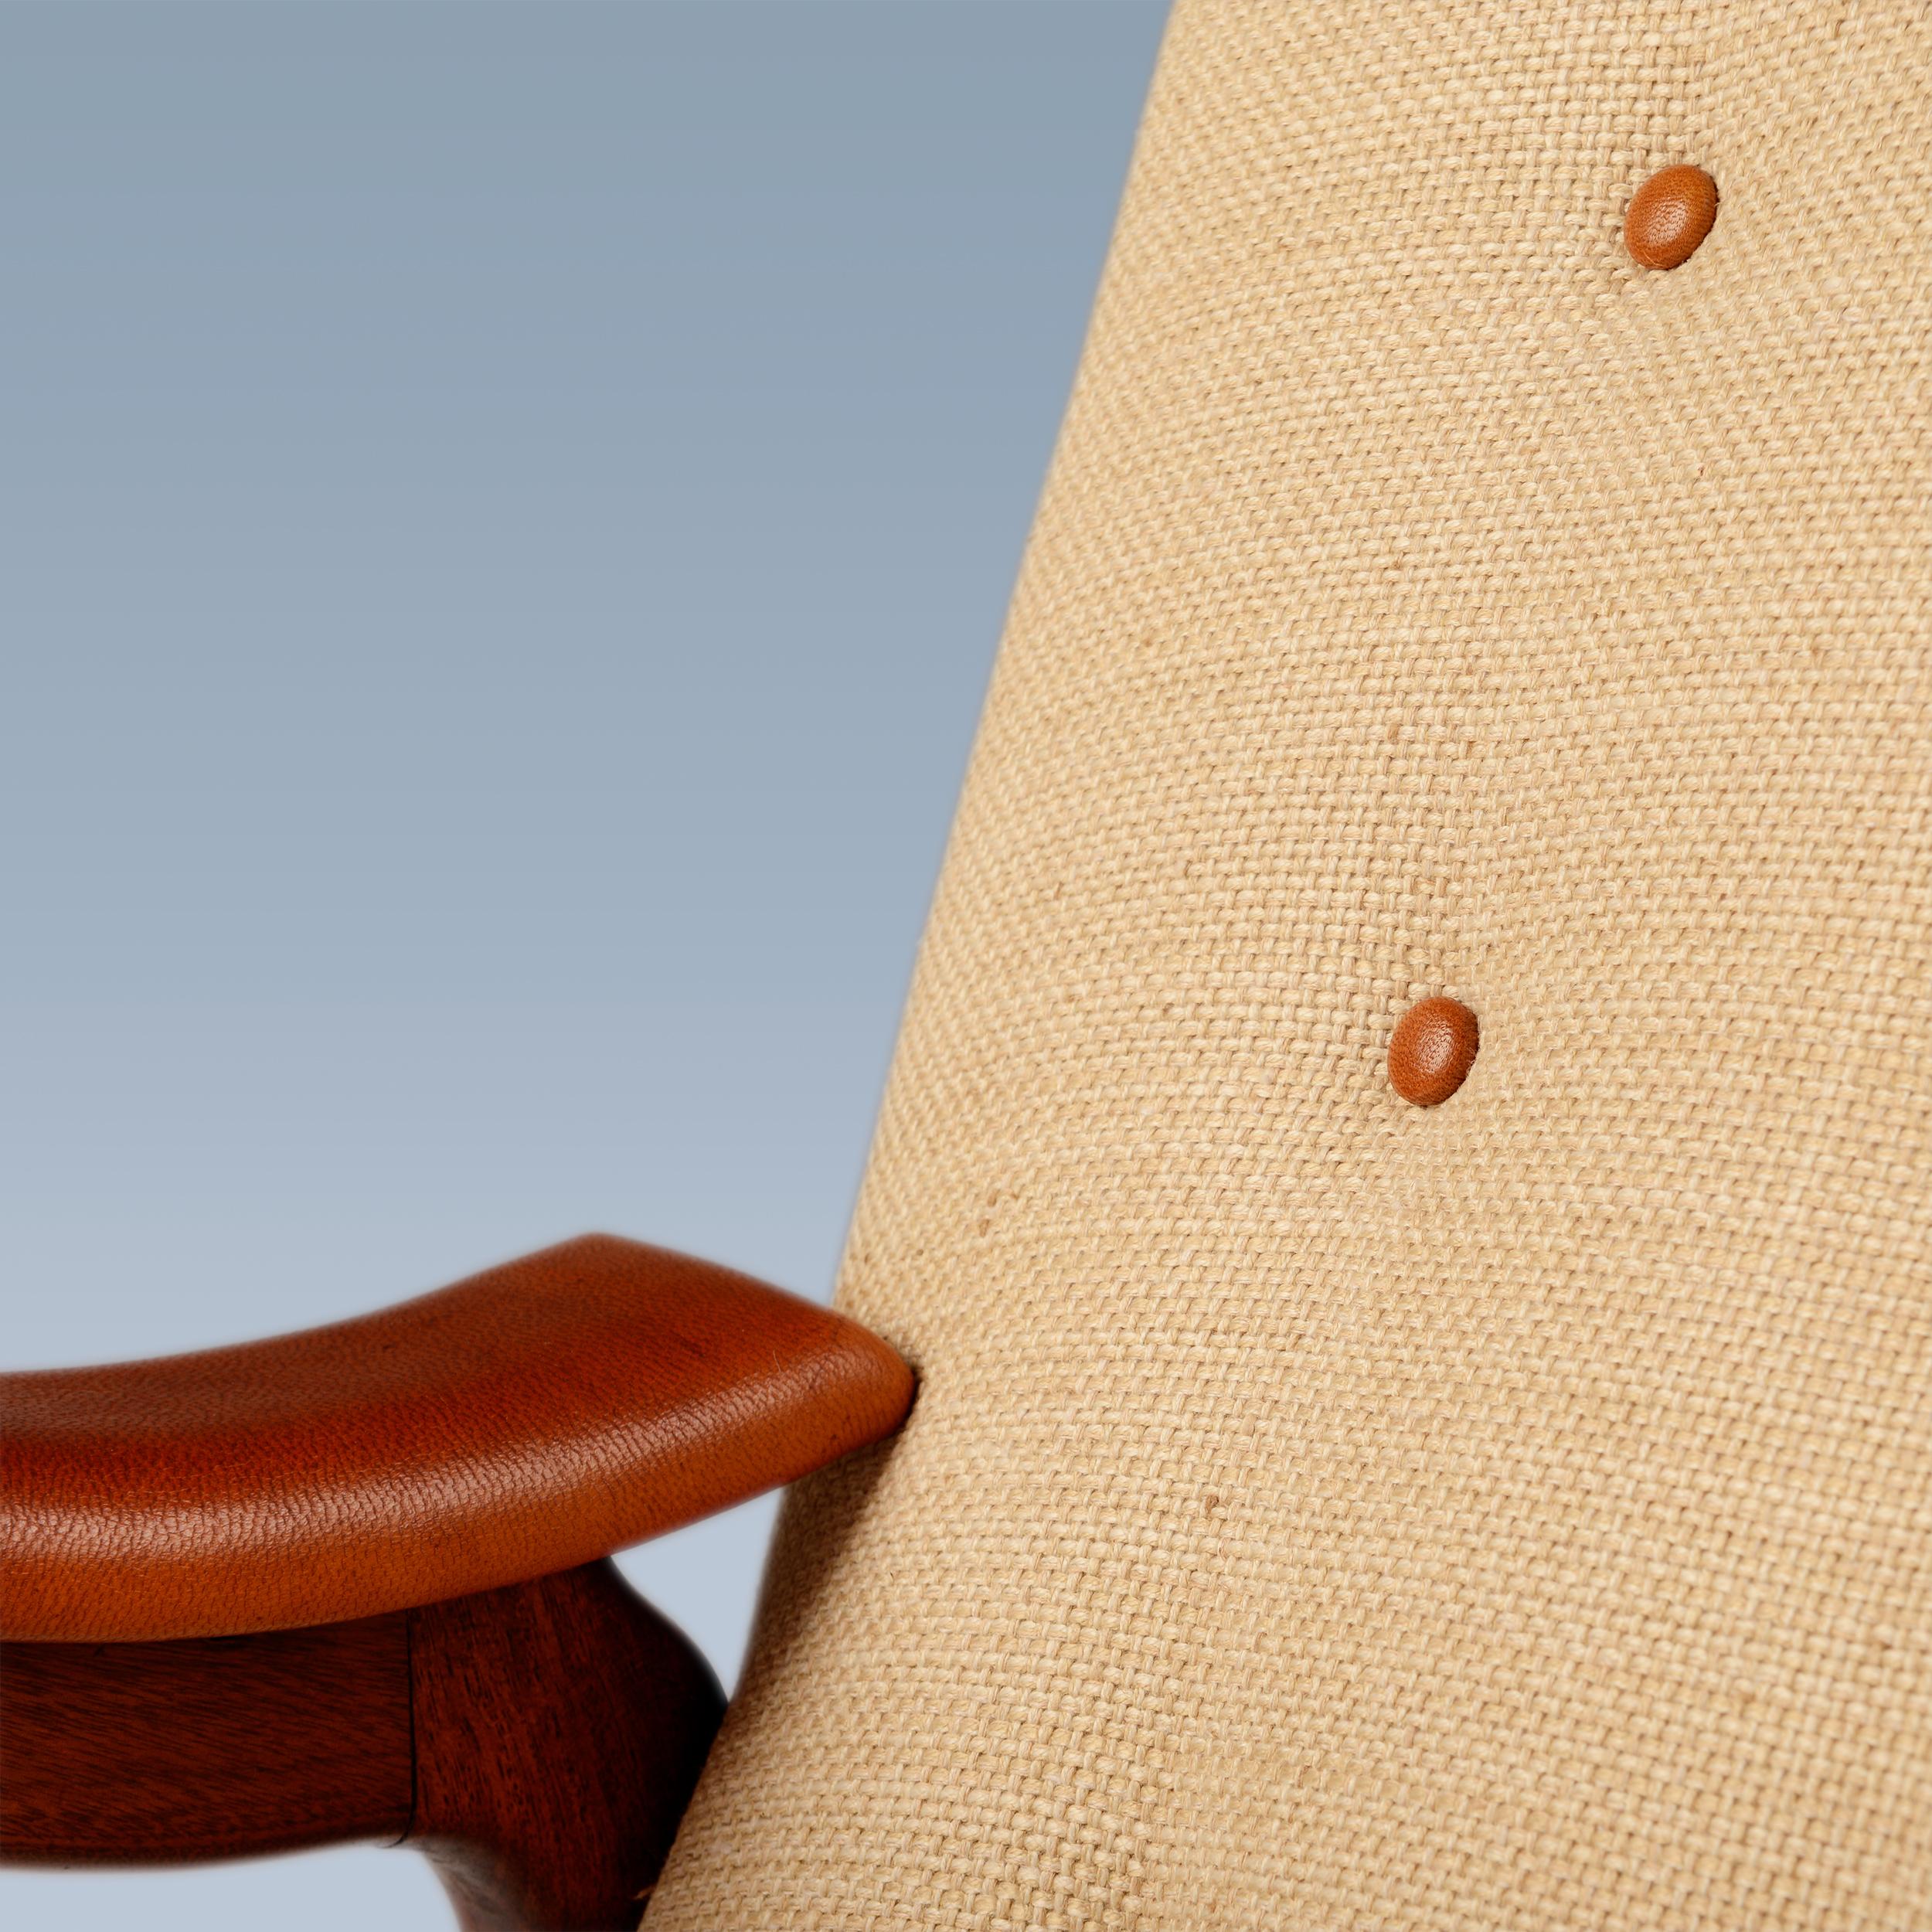 Teak chair with curvy seat upholstered with light fabric and leather details For Sale 3